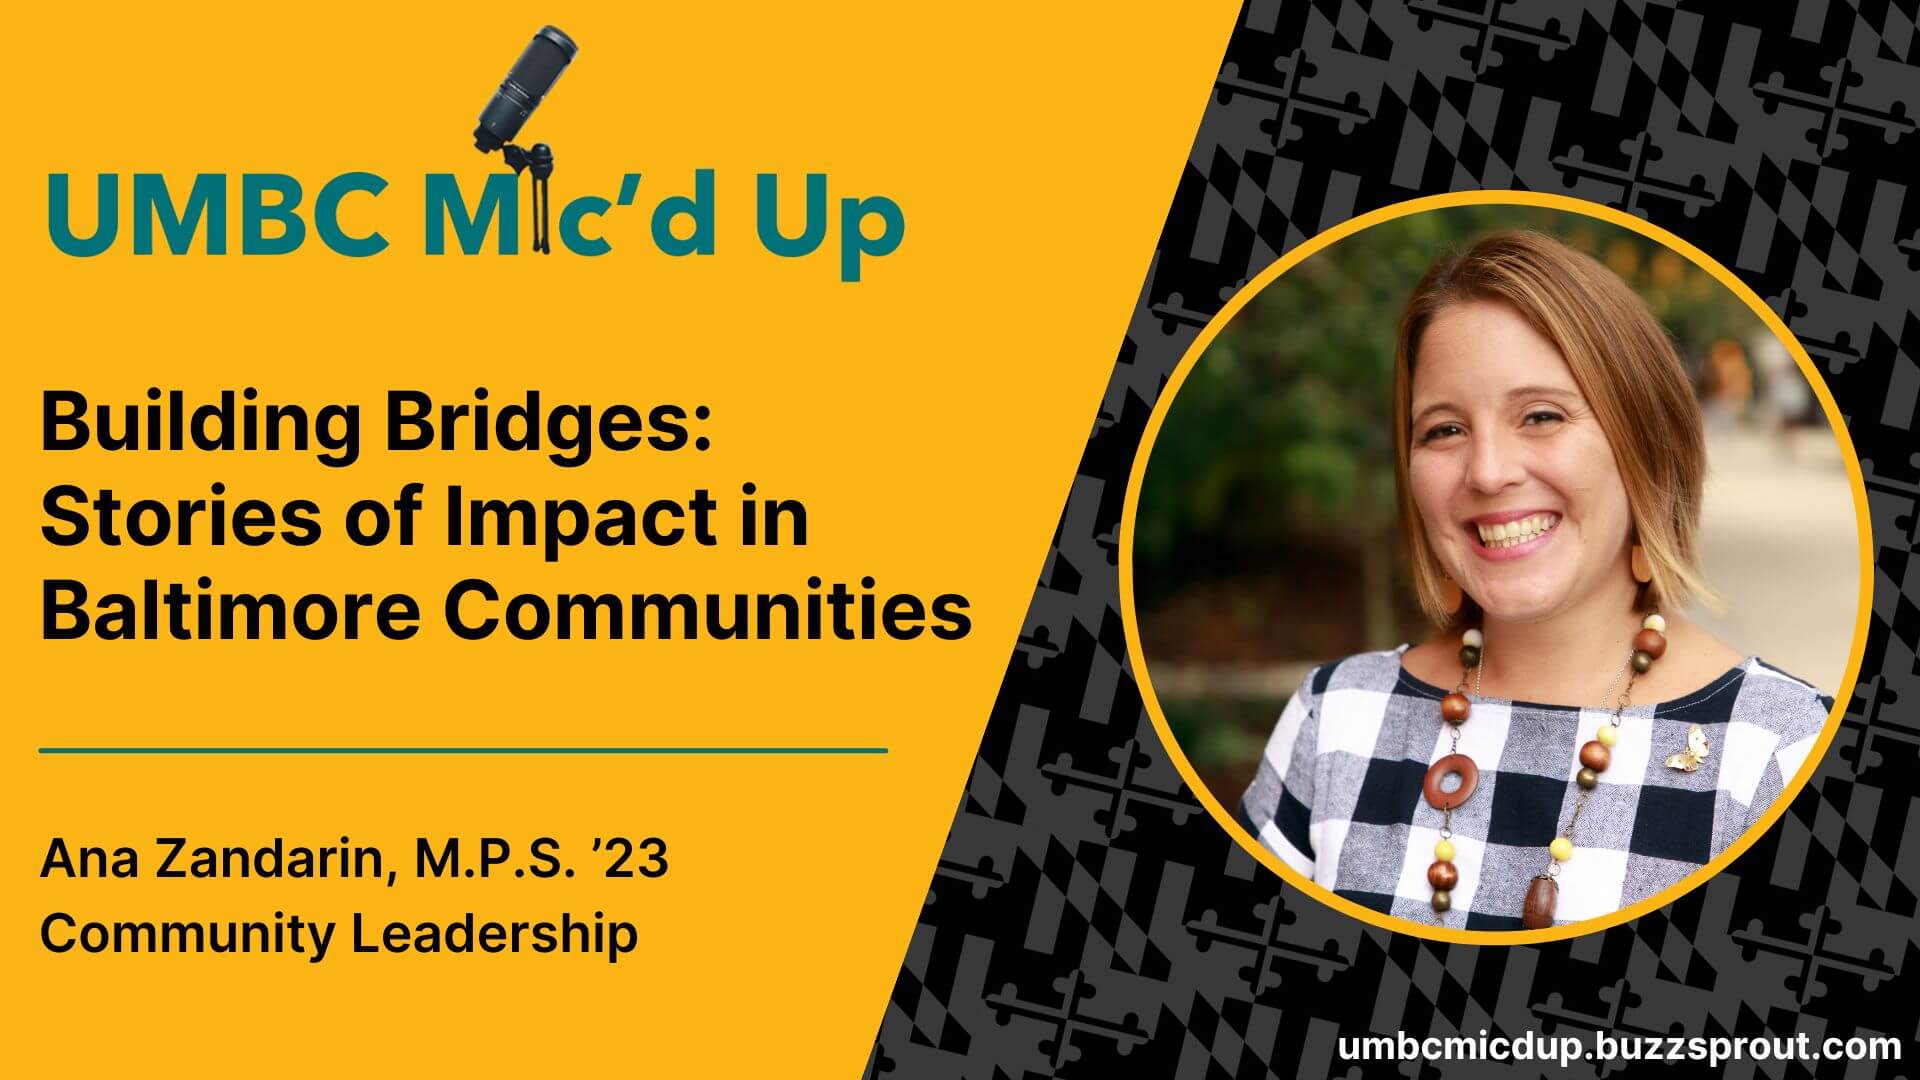 The power of community is explained in this UMBC Mic'd Up Podcast episode